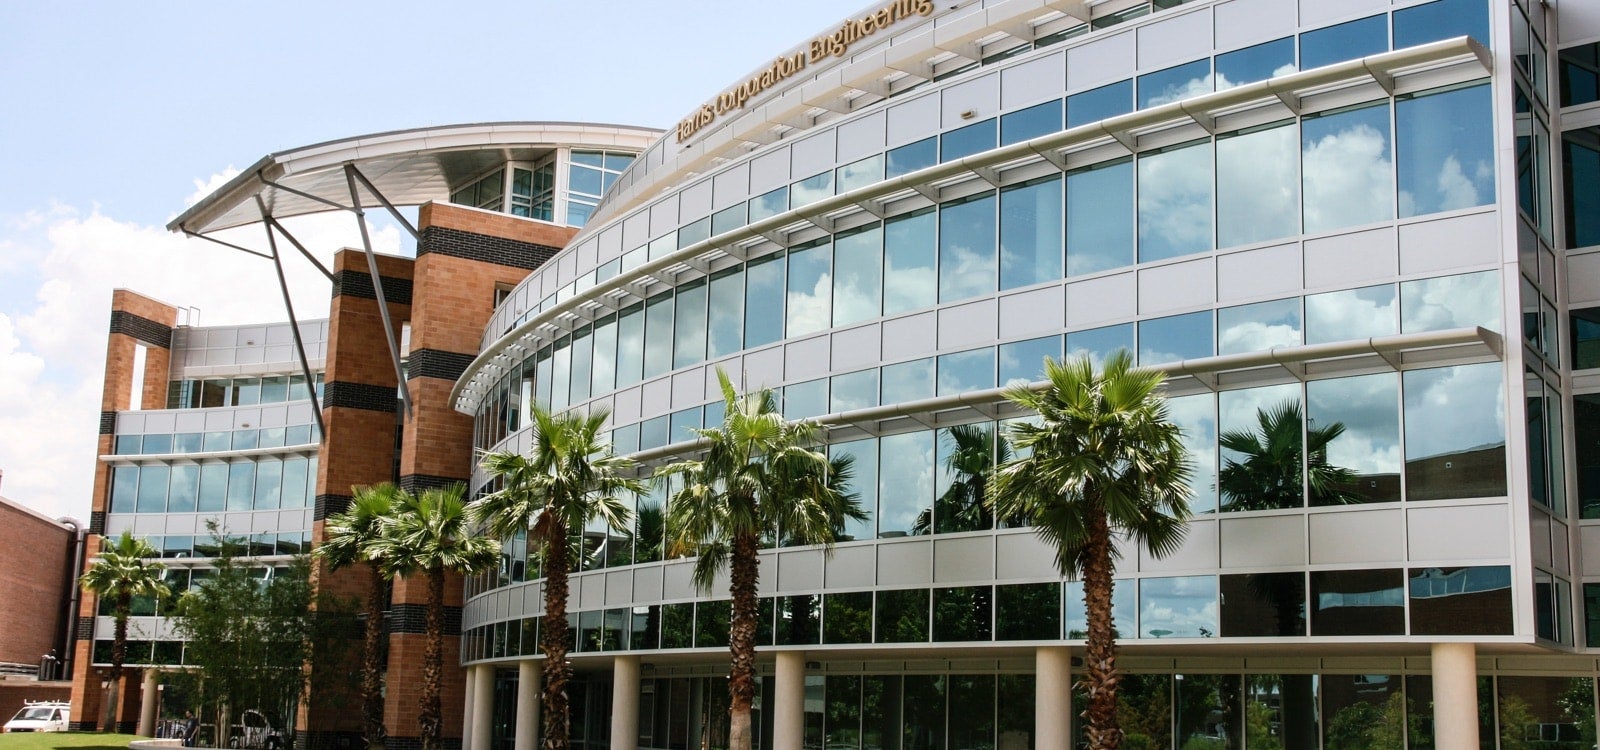 image of ucf campus building: harris corporation engineering center